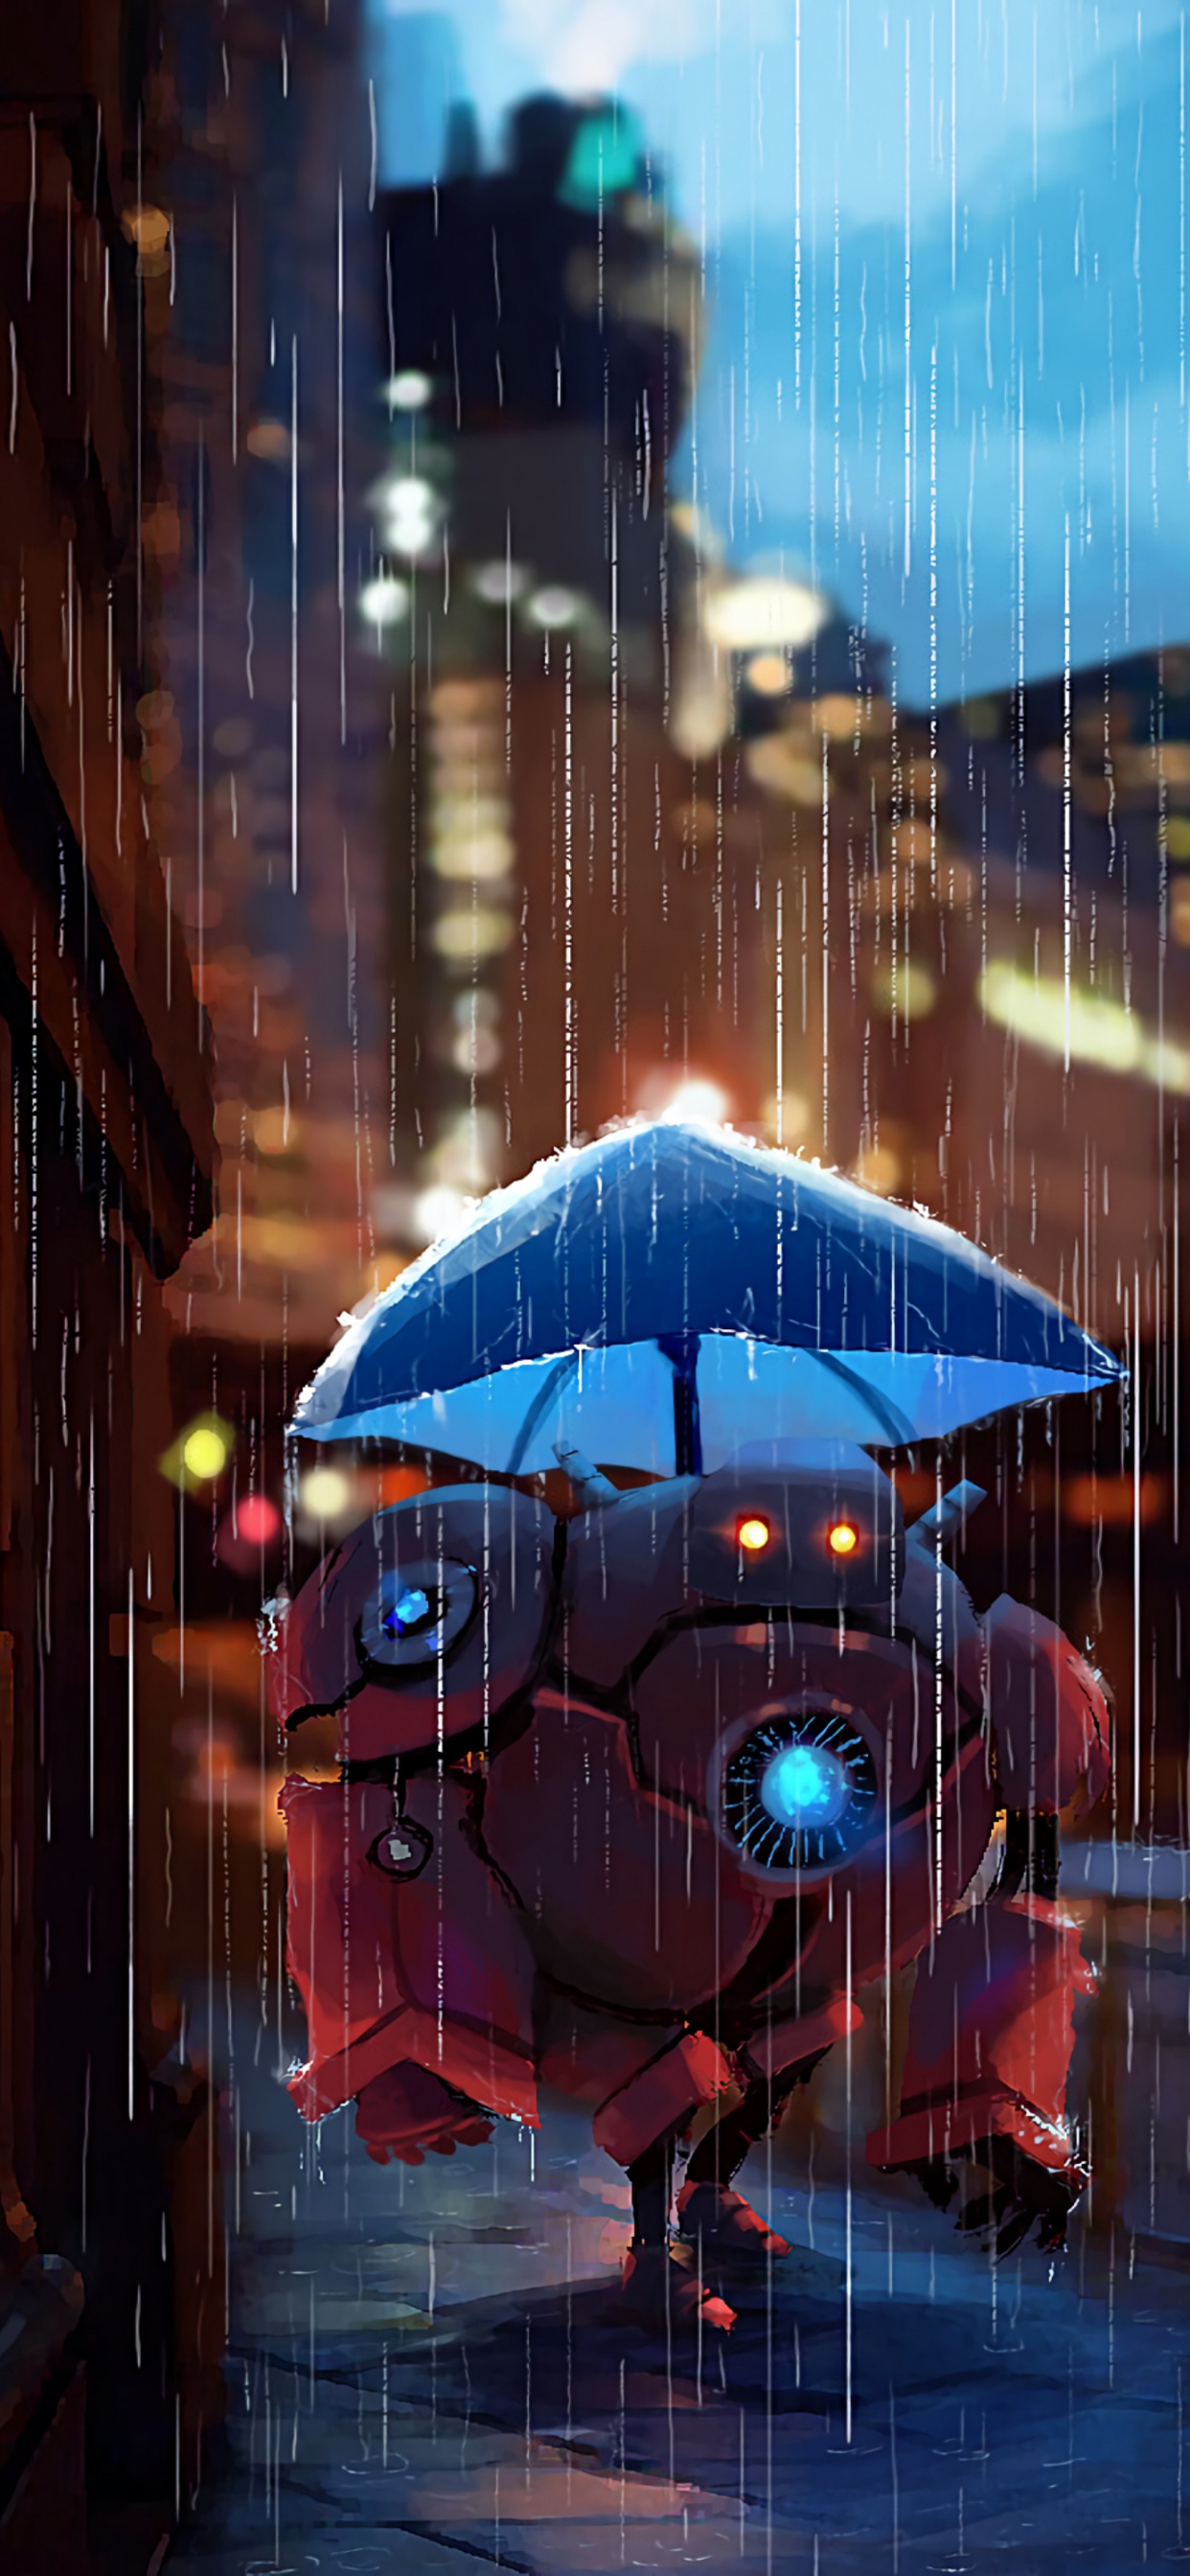 Blue Umbrella in The City During Night Time. Wallpaper in 1242x2688 Resolution